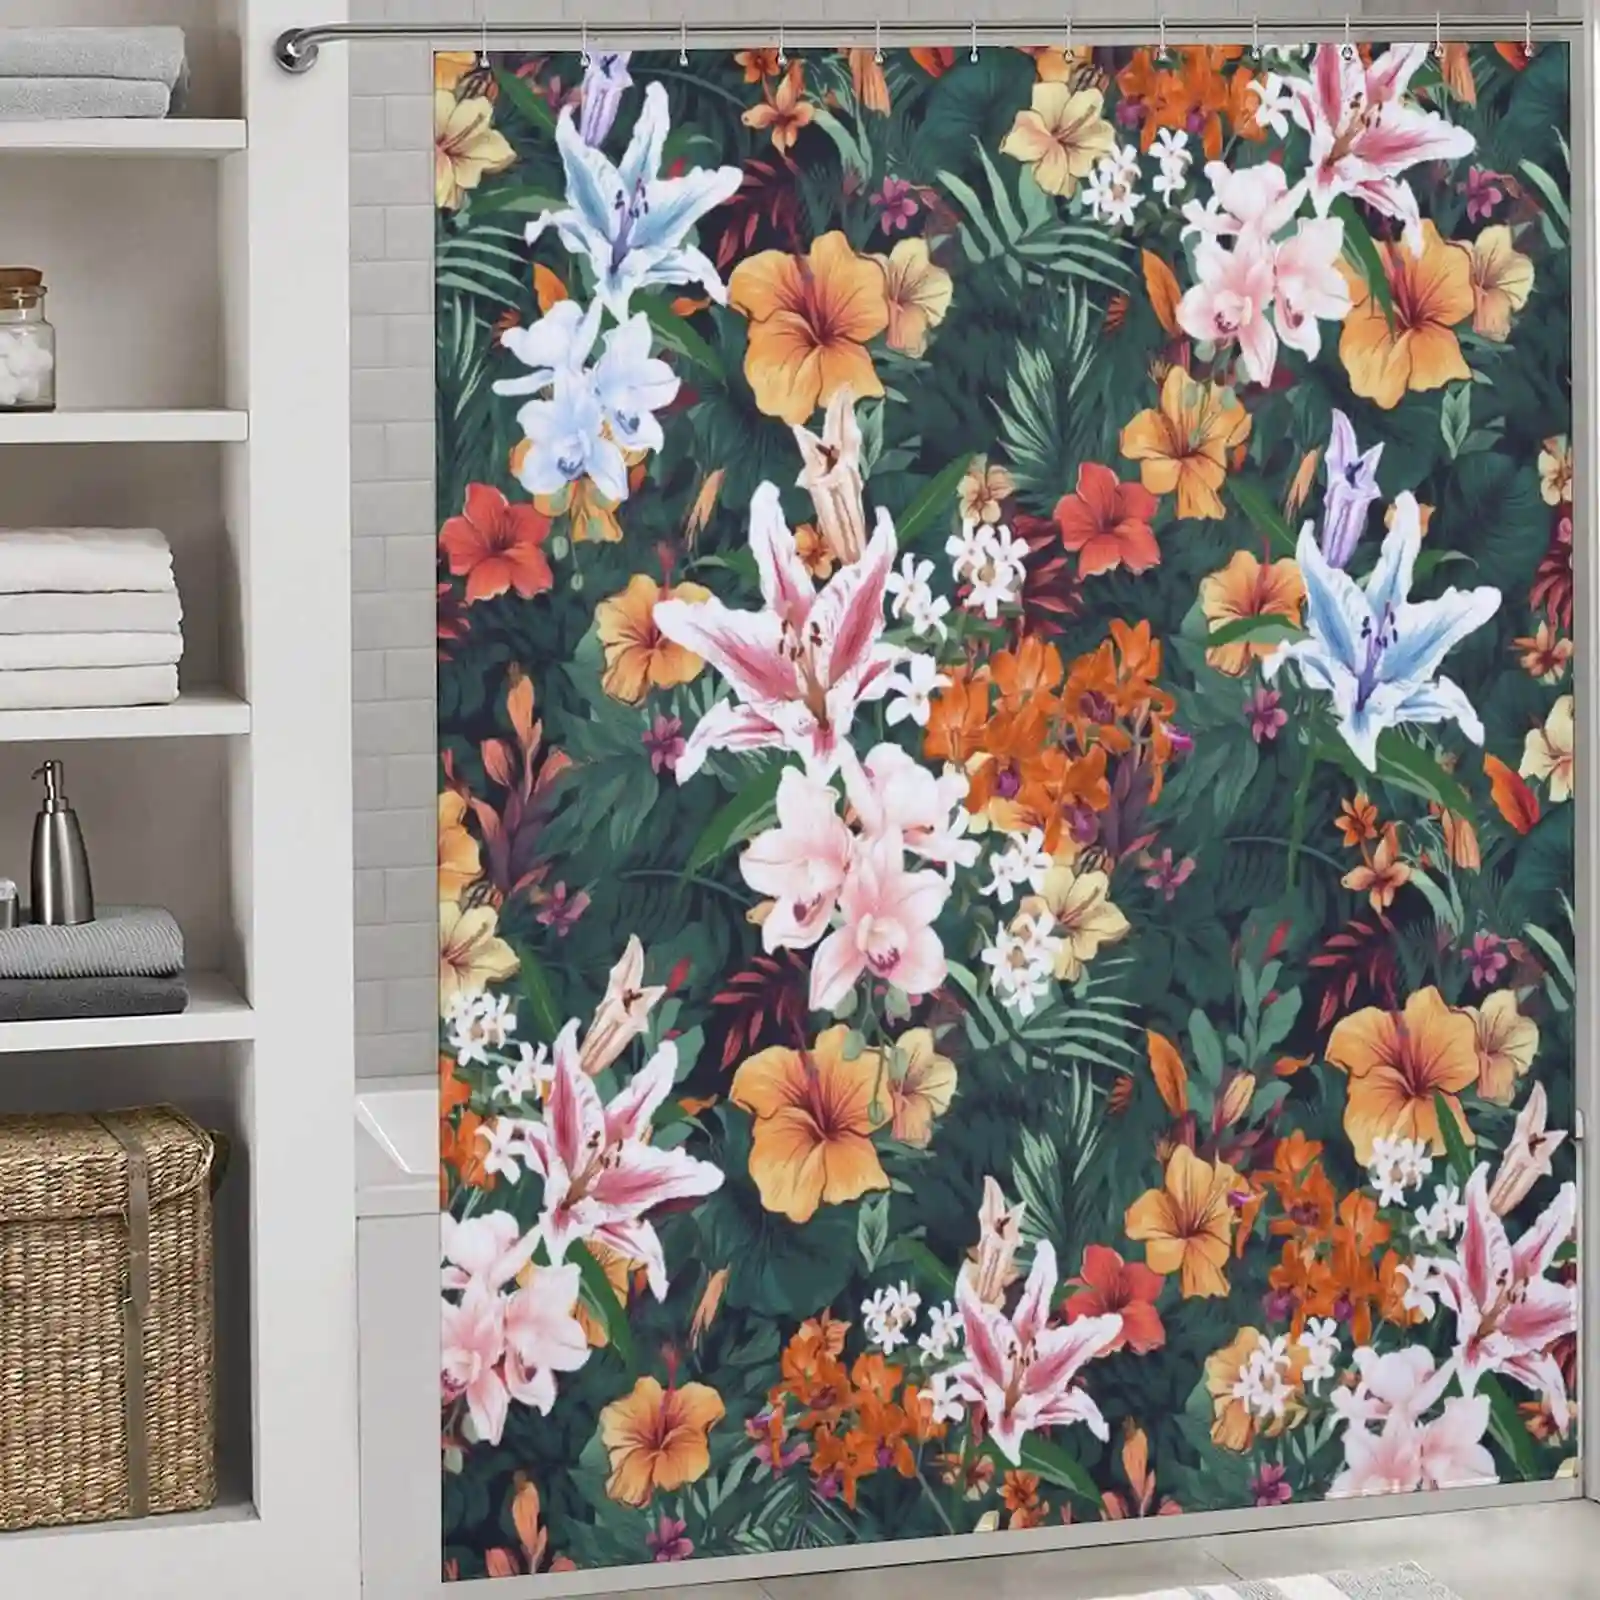 A shower curtain with tropical flowers on it.